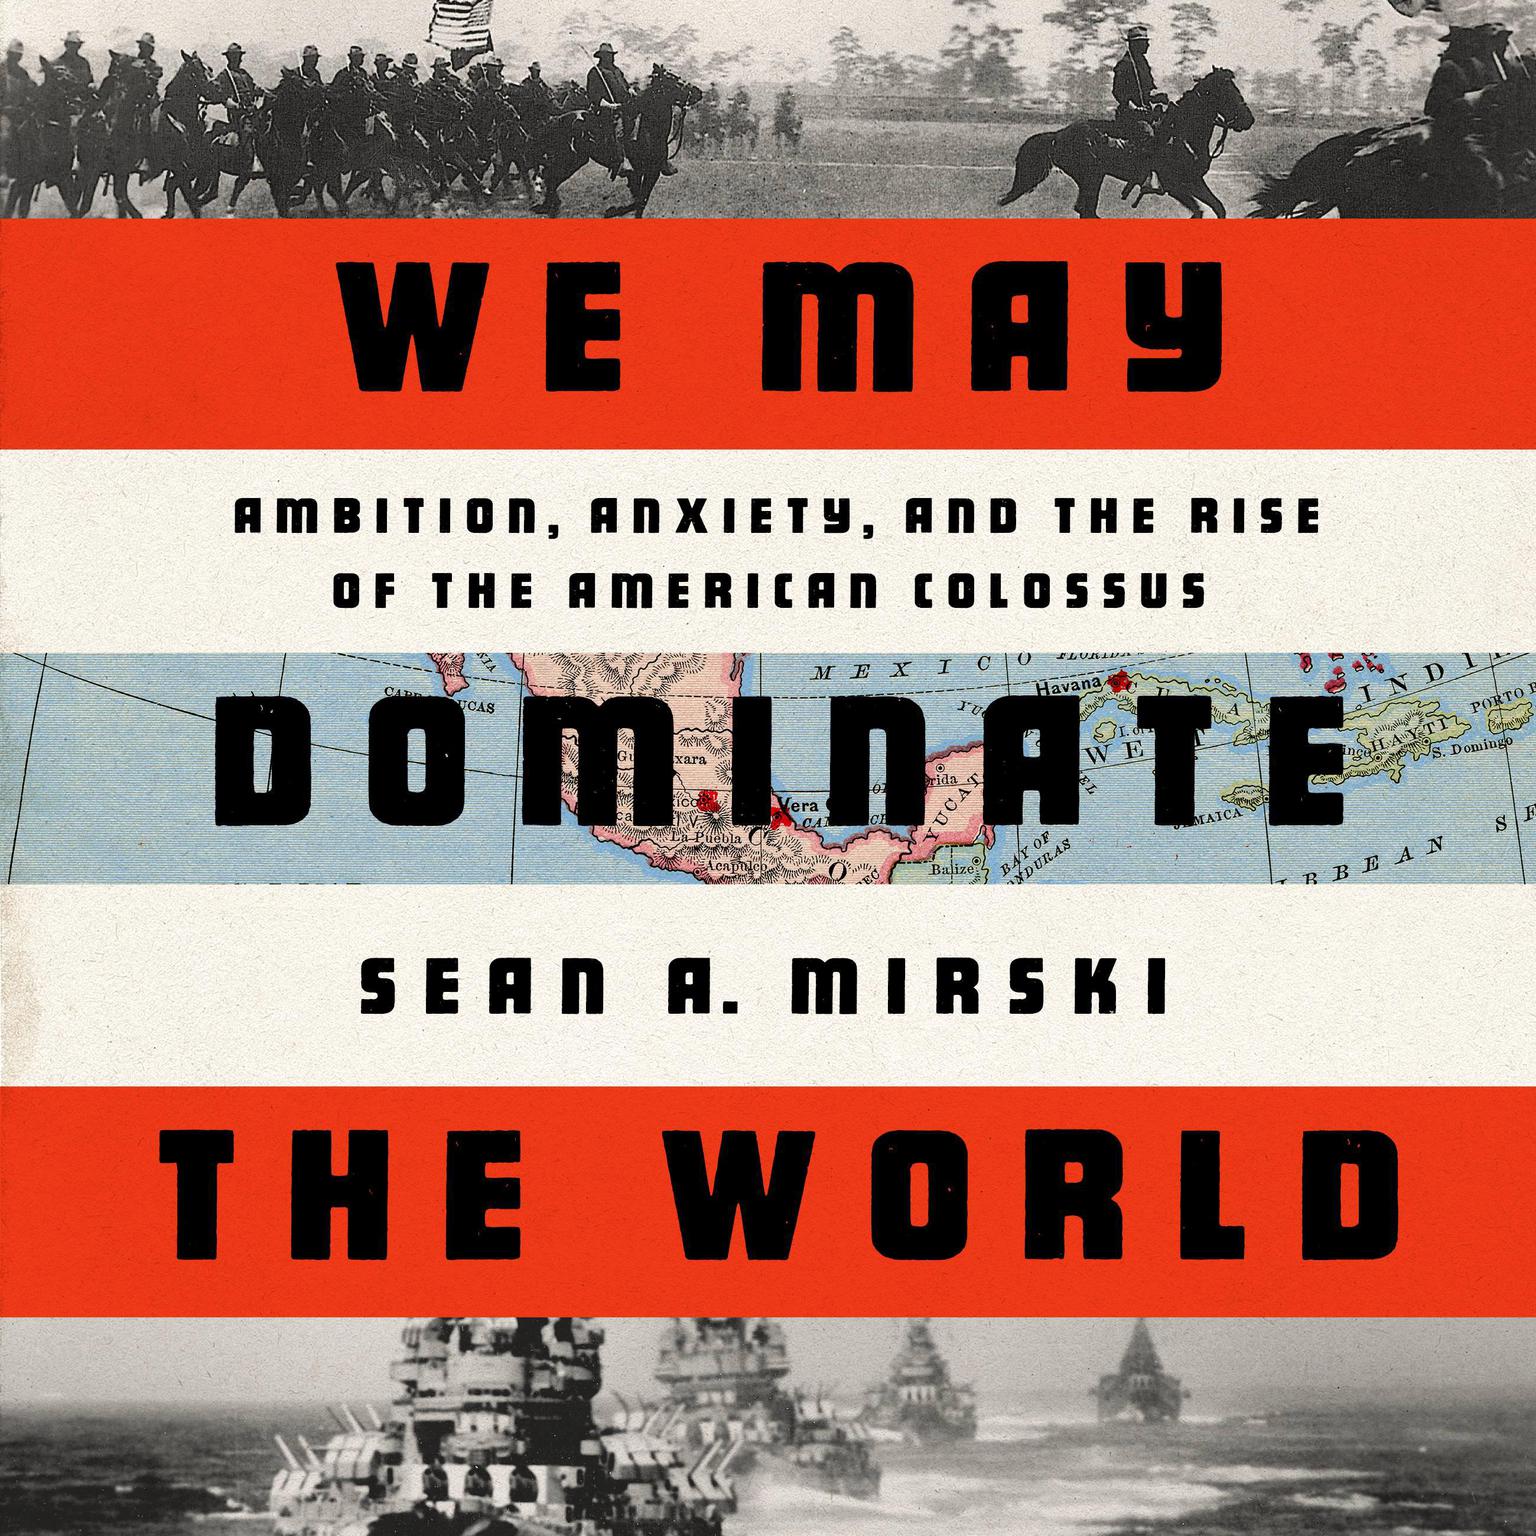 We May Dominate the World: Ambition, Anxiety, and the Rise of the American Colossus Audiobook, by Sean A. Mirski